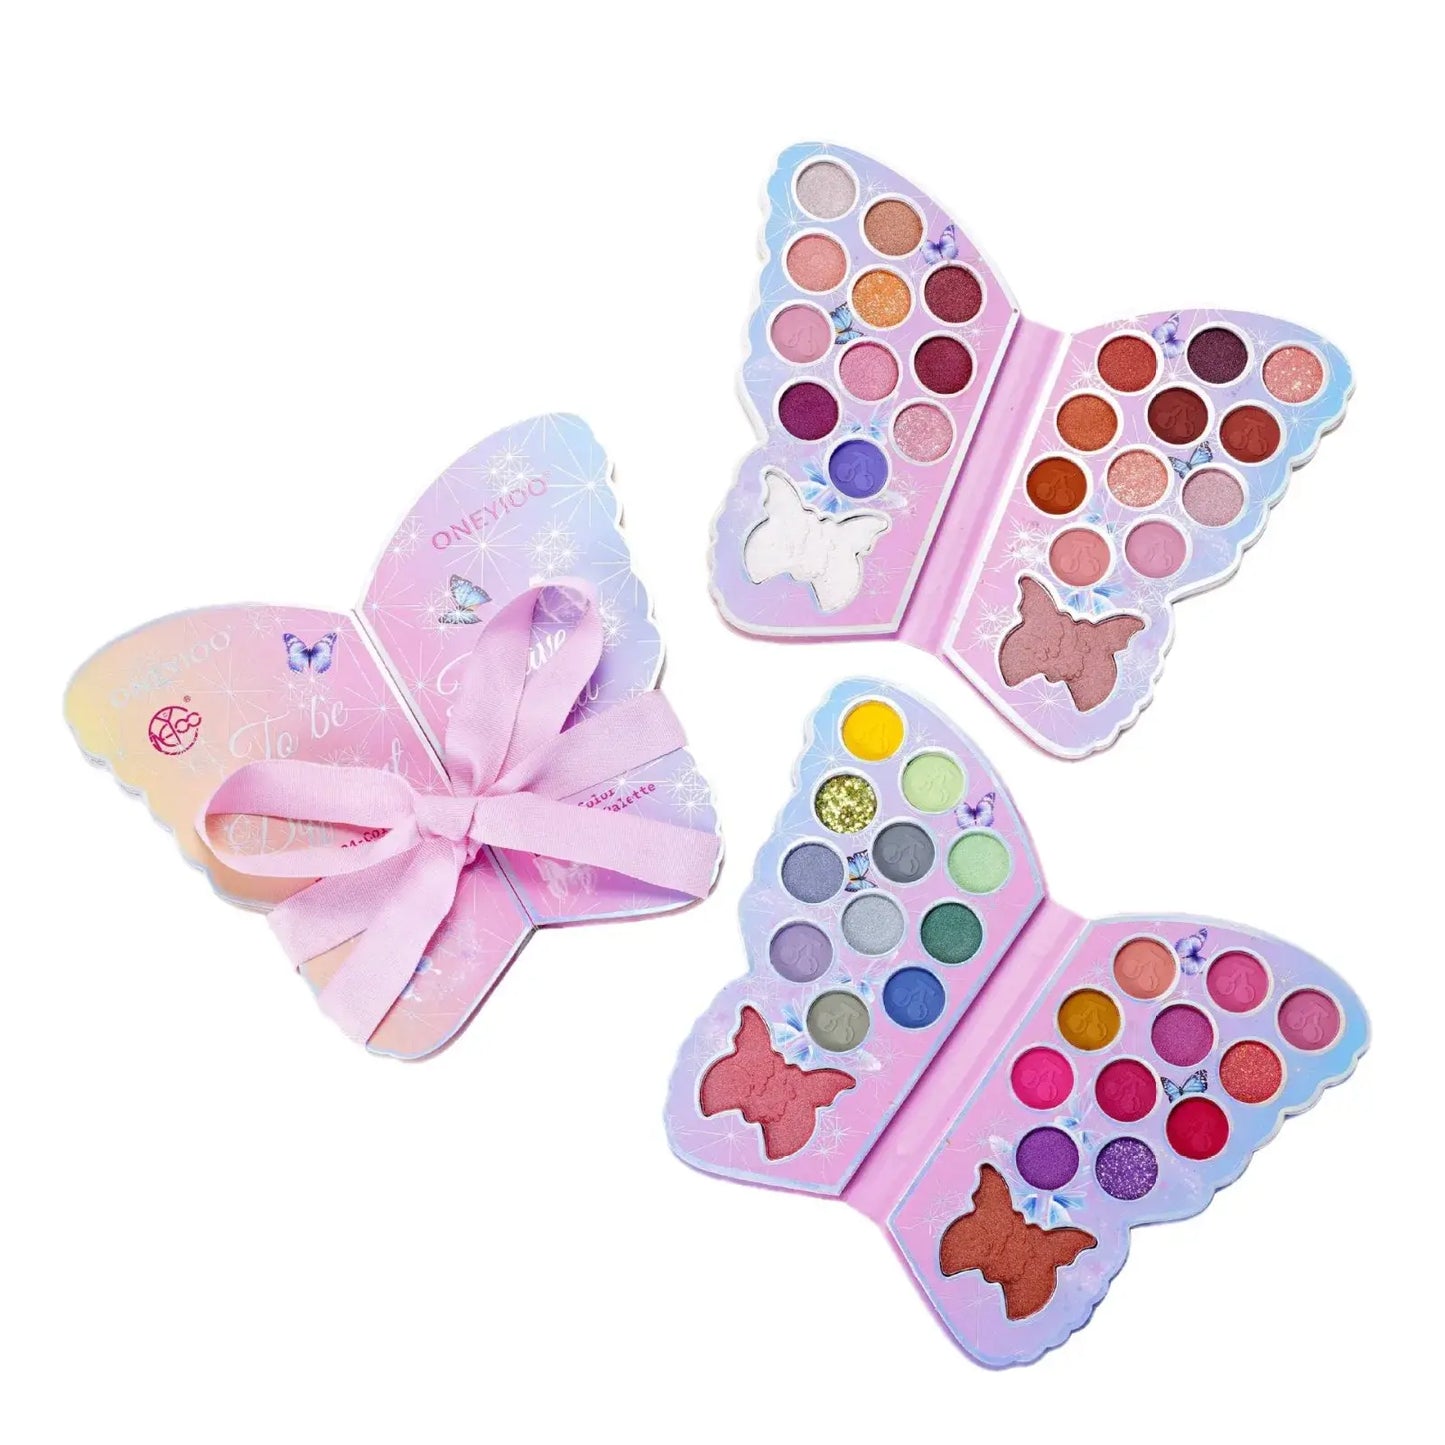 ONEYIOO Butterfly 48-Color Eyeshadow Palette